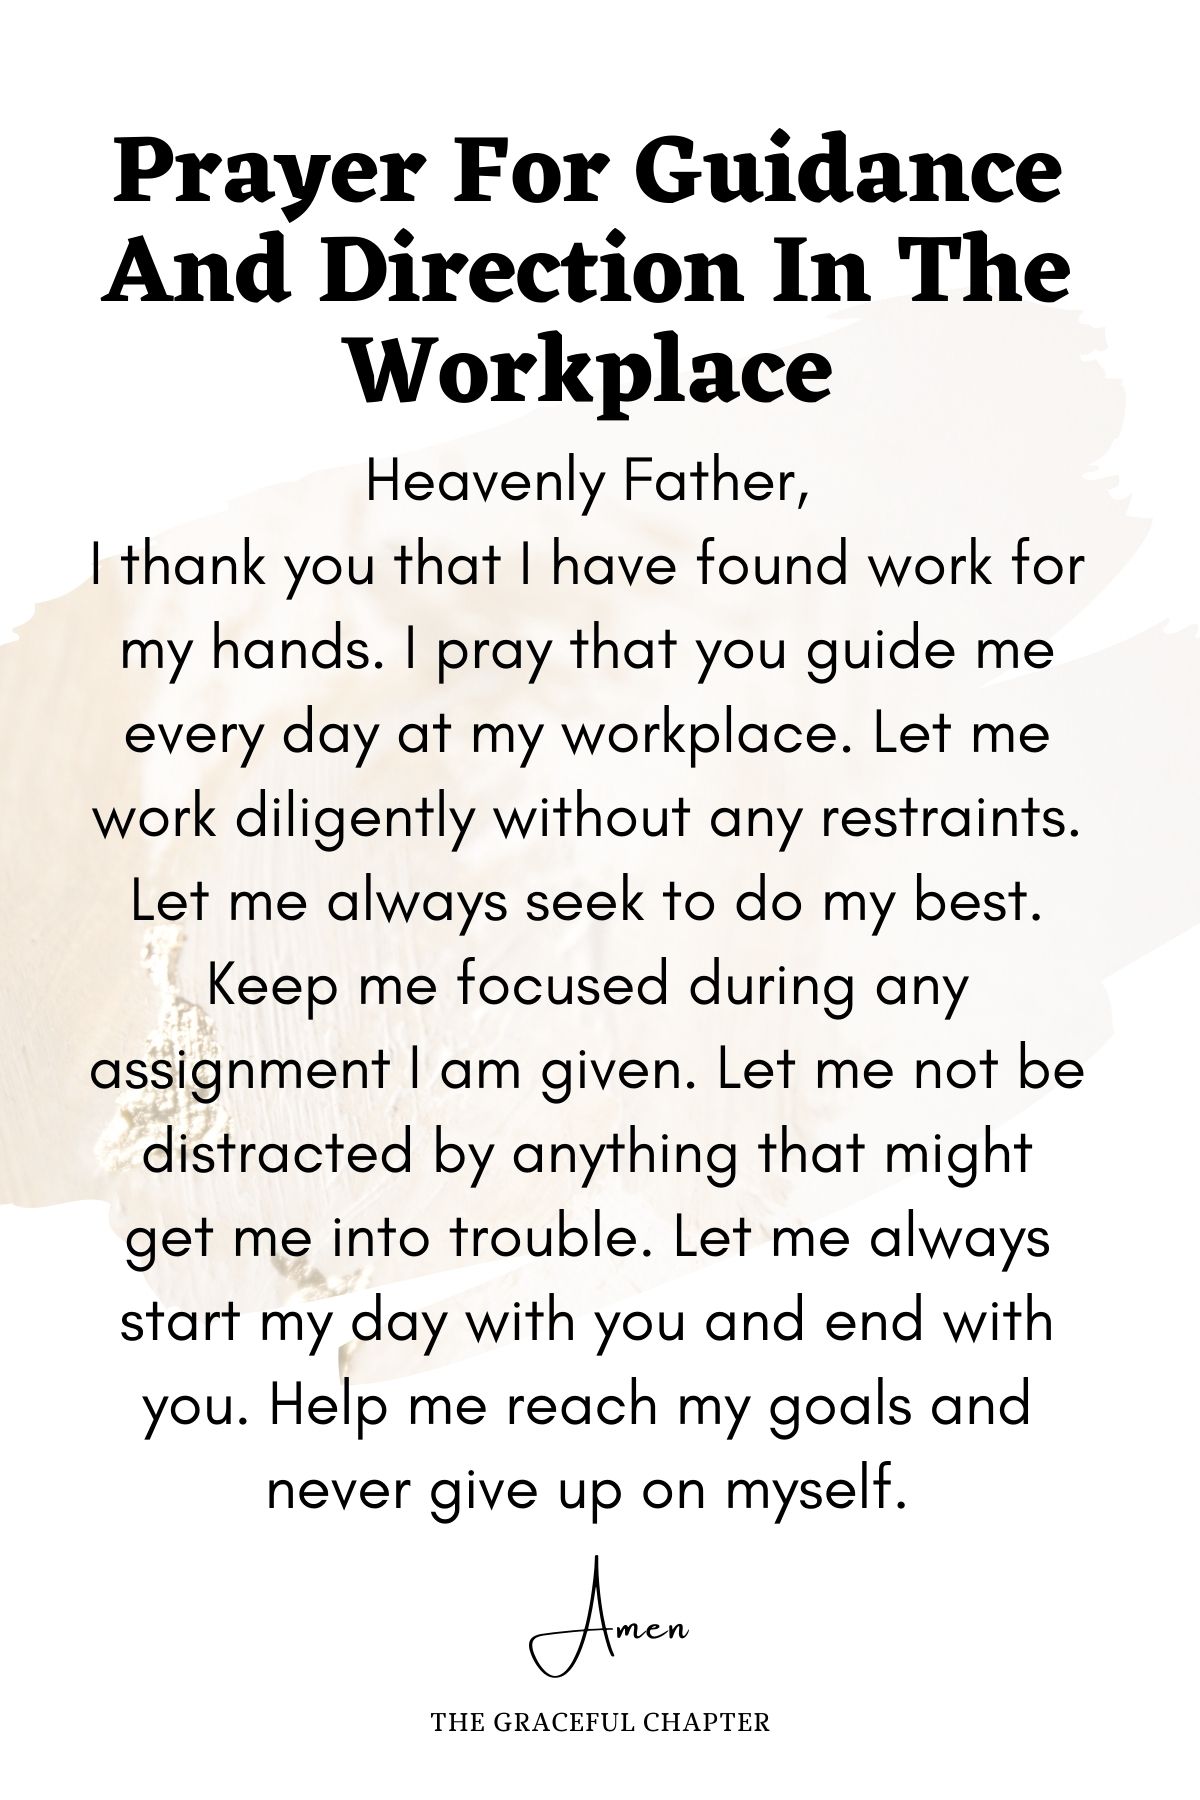 Prayers for guidance and direction in the workplace